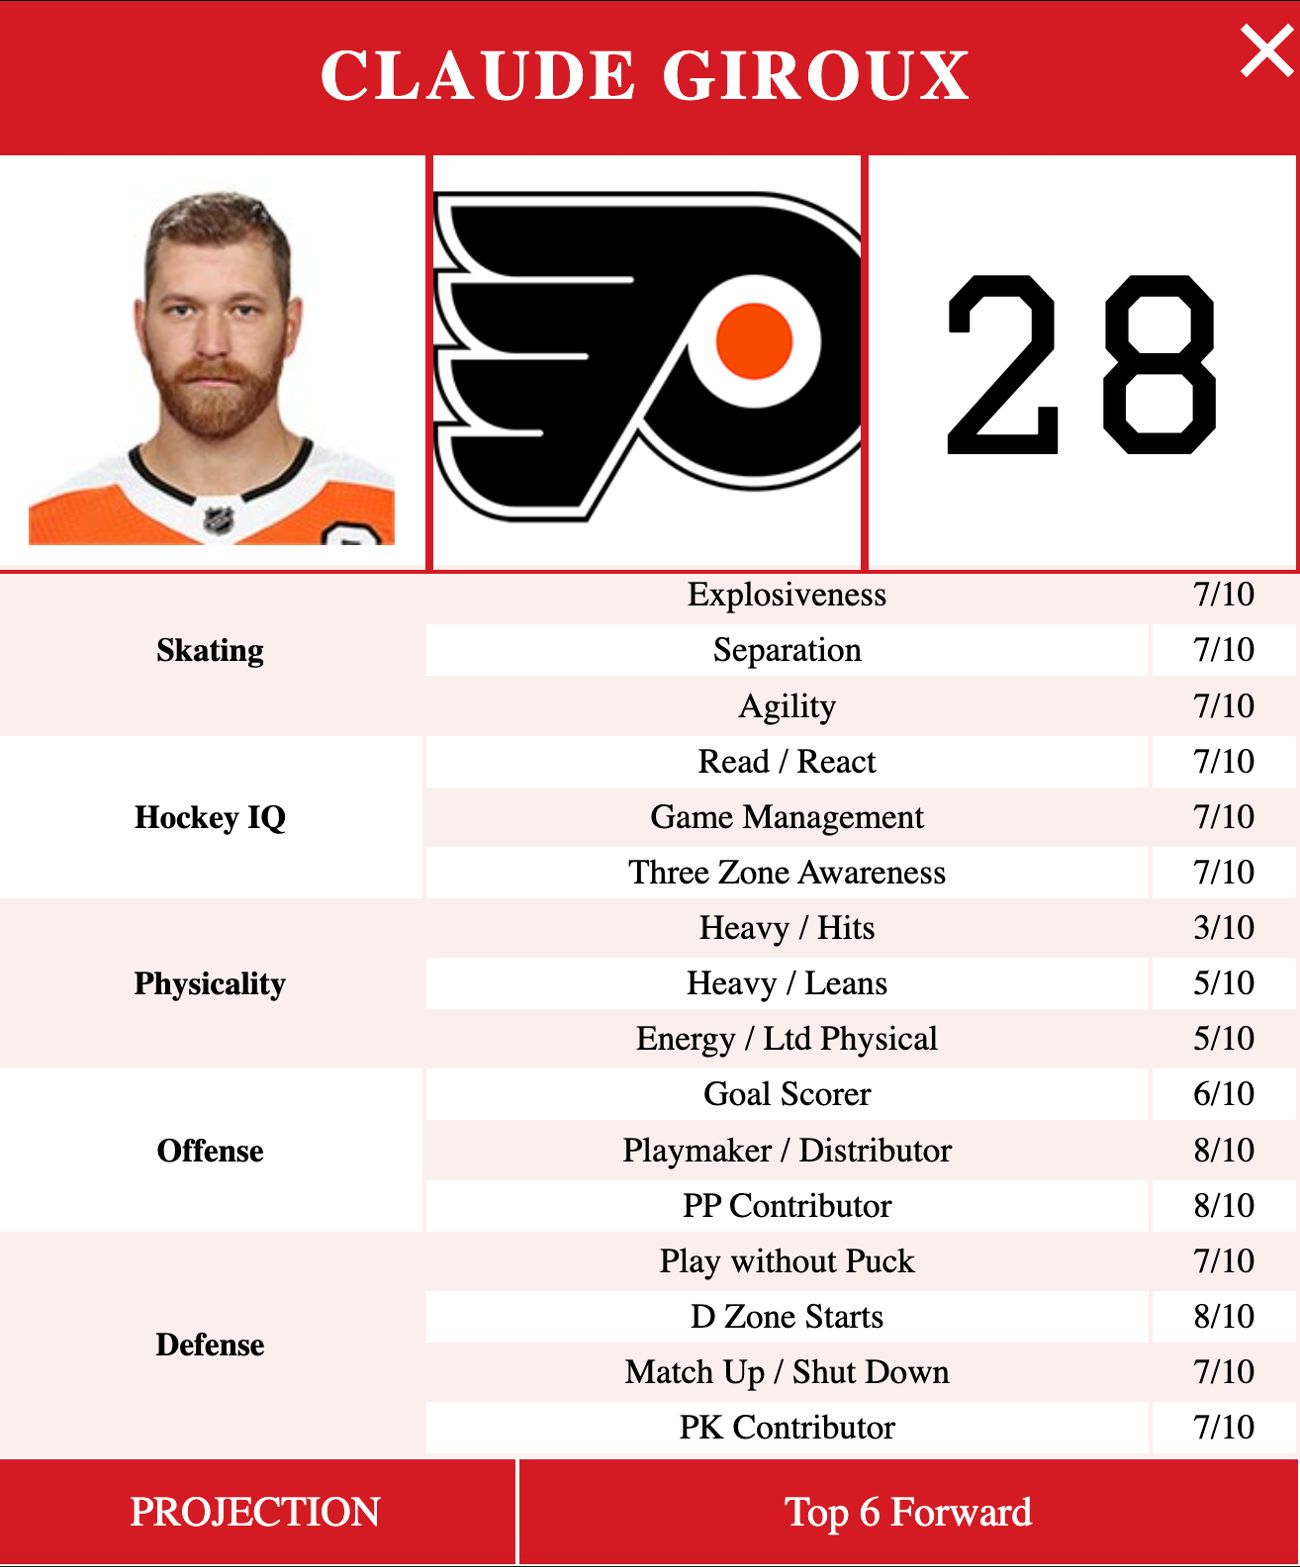 Is the NHL trade market set for a potential Claude Giroux trade